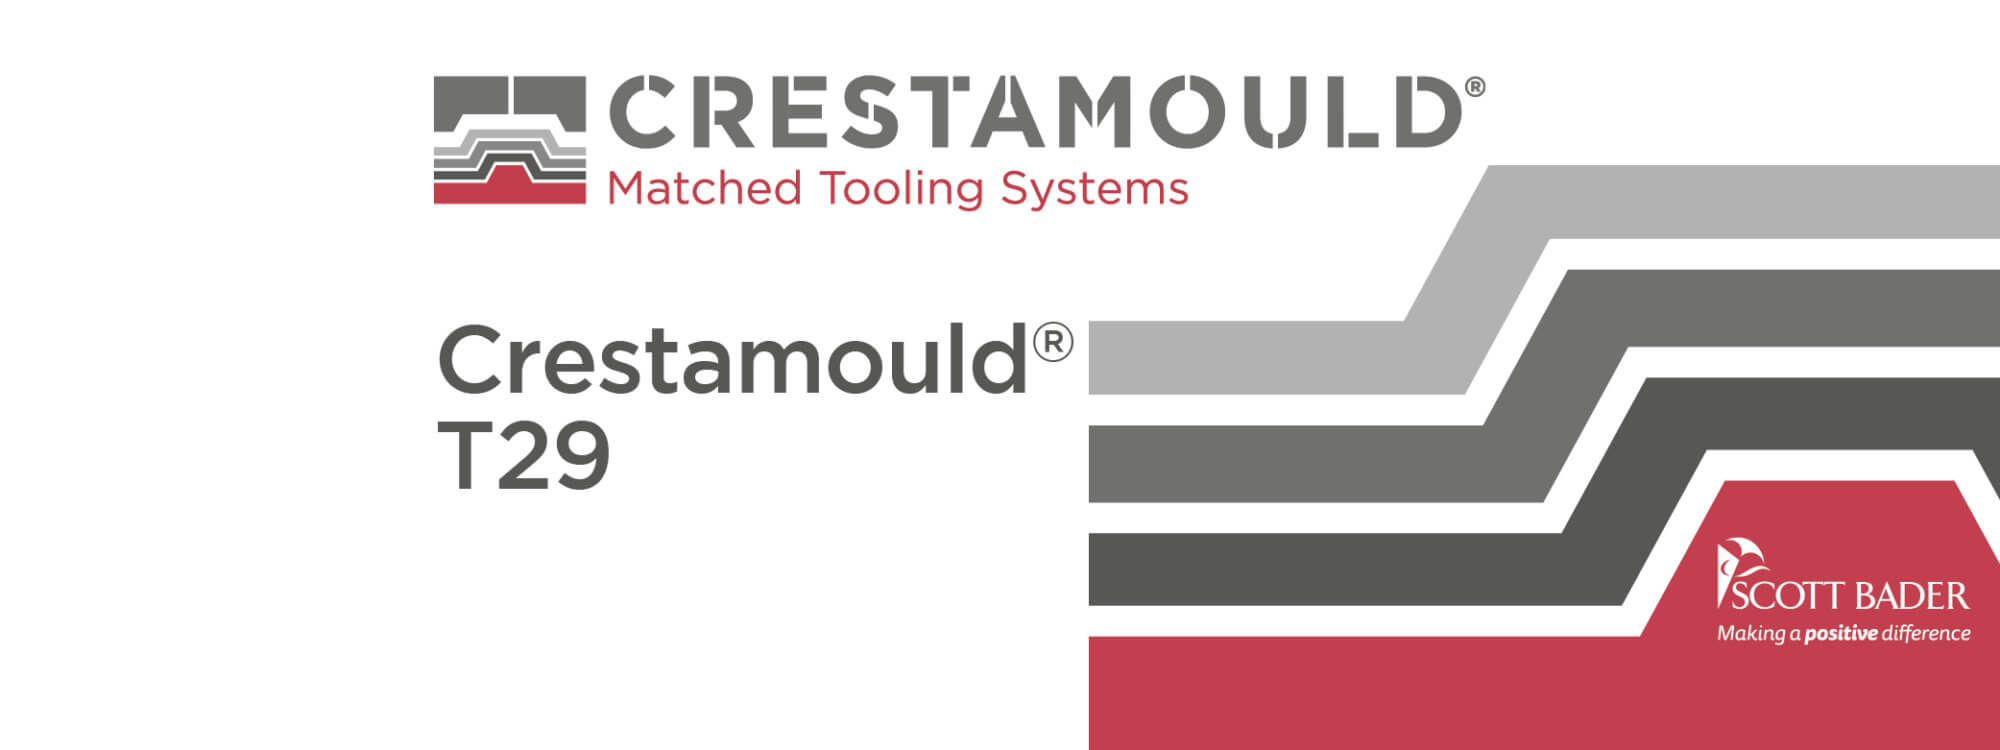 Scott Bader launches Crestamould<sup>®</sup> T29